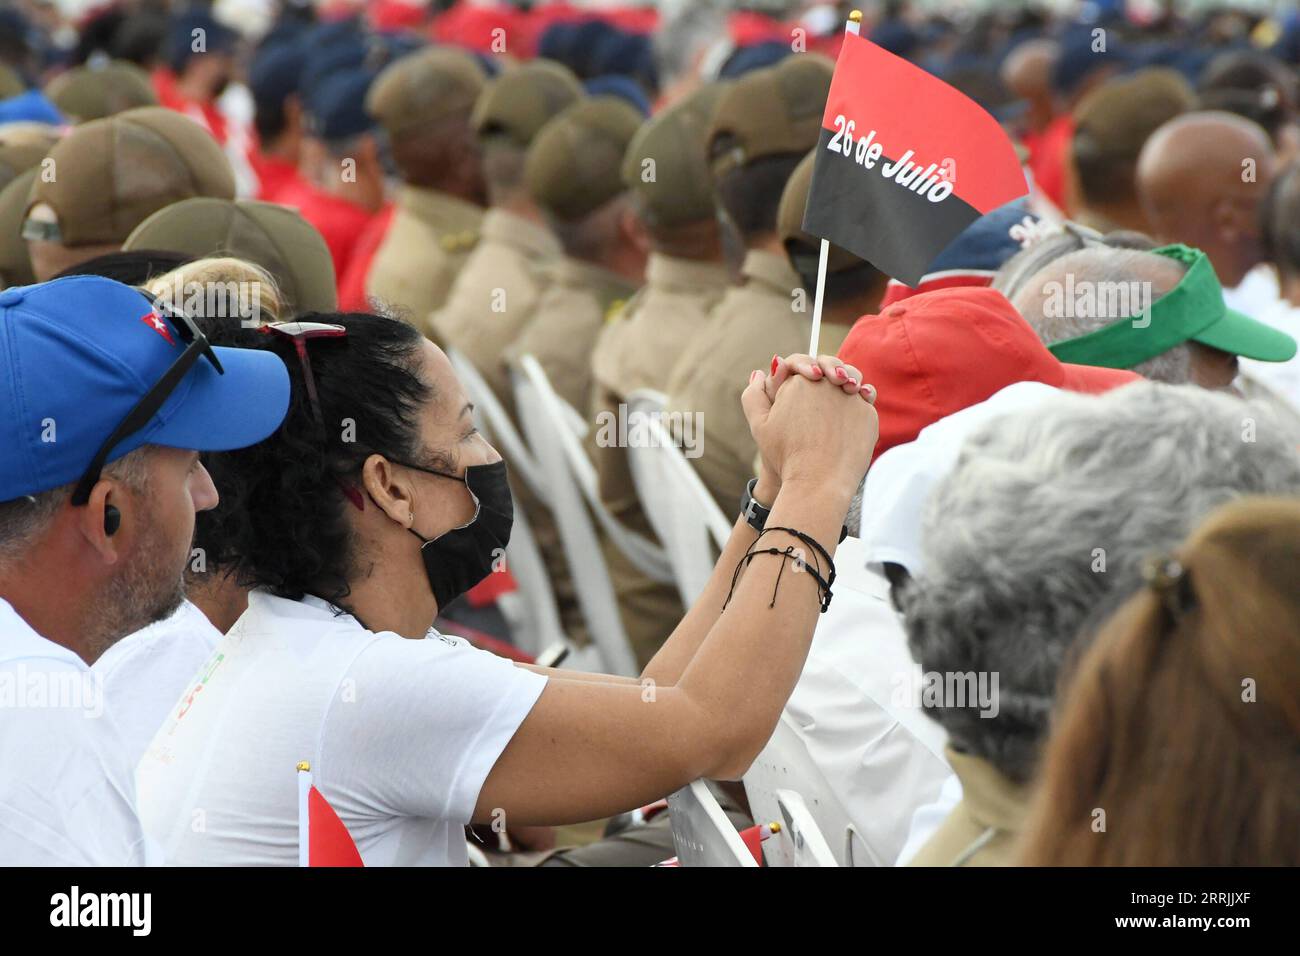 220727 -- CIENFUEGOS, July 27, 2022 -- People attend a massive rally to celebrate the National Rebellion Day in Cienfuegos, Cuba, July 26, 2022. Cubans on Tuesday celebrated the National Rebellion Day with a massive rally for the first time since the onset of the COVID-19 pandemic. Cuban revolutionary leader Raul Castro and Cuban President Miguel Diaz-Canel attended the event held in the central province of Cienfuegos, located some 250 kilometers east of the country s capital Havana. Photo by /Xinhua CUBA-CIENFUEGOS-NATIONAL REBELLION DAY-CELEBRATION JoaquinxHernandez PUBLICATIONxNOTxINxCHN Stock Photo